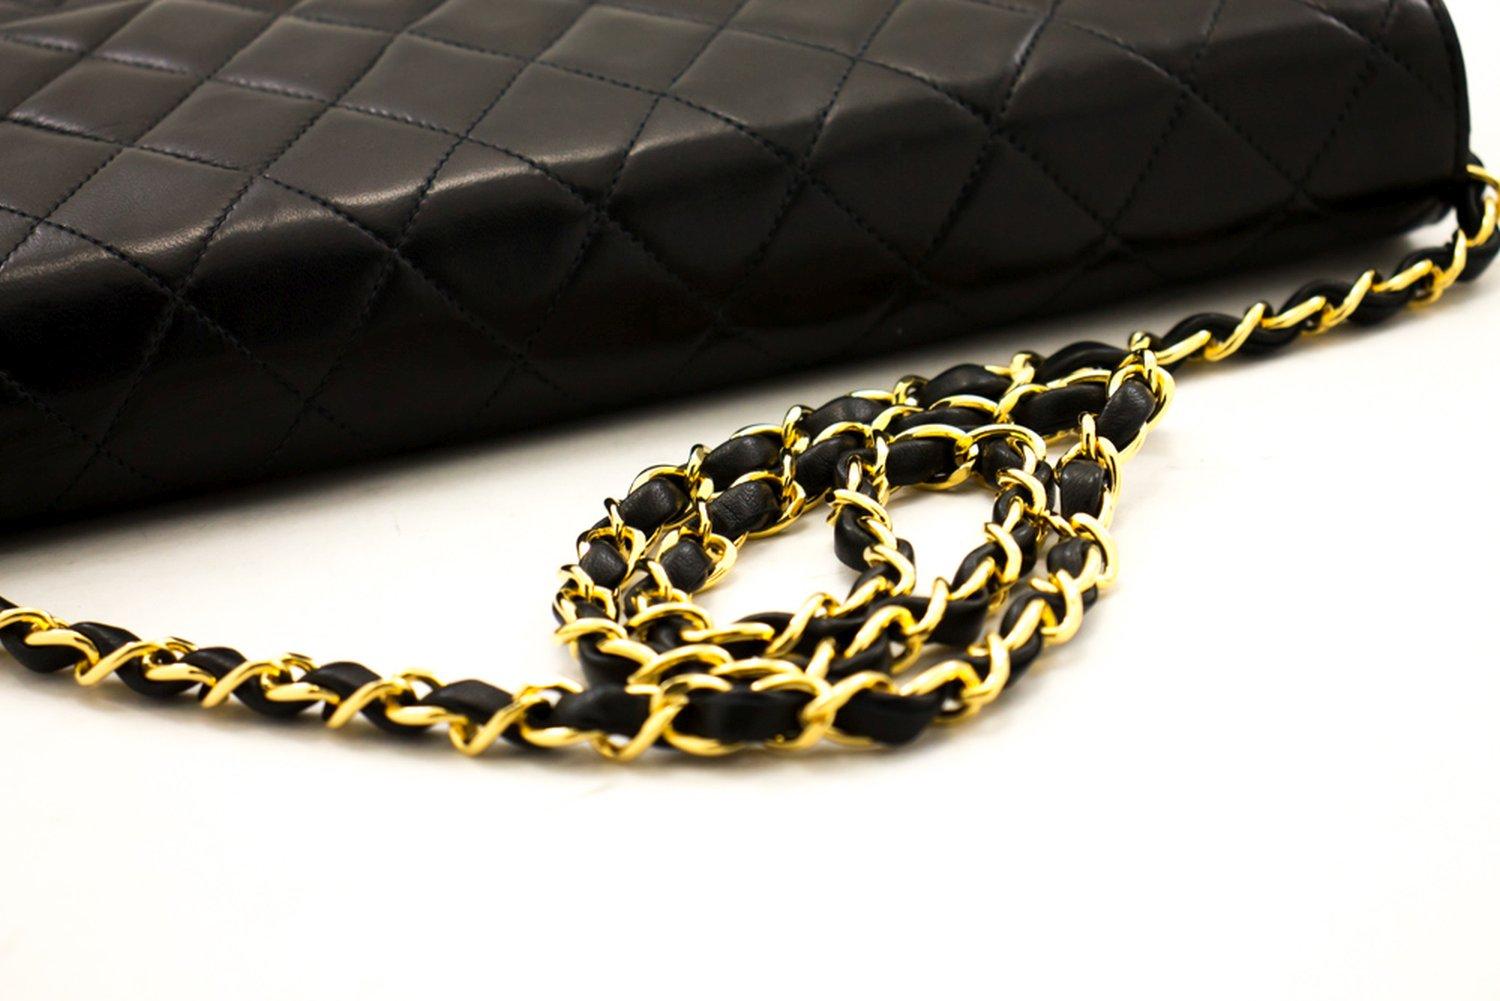 CHANEL Chain Shoulder Bag Black Clutch Flap Quilted Purse Lambskin 9